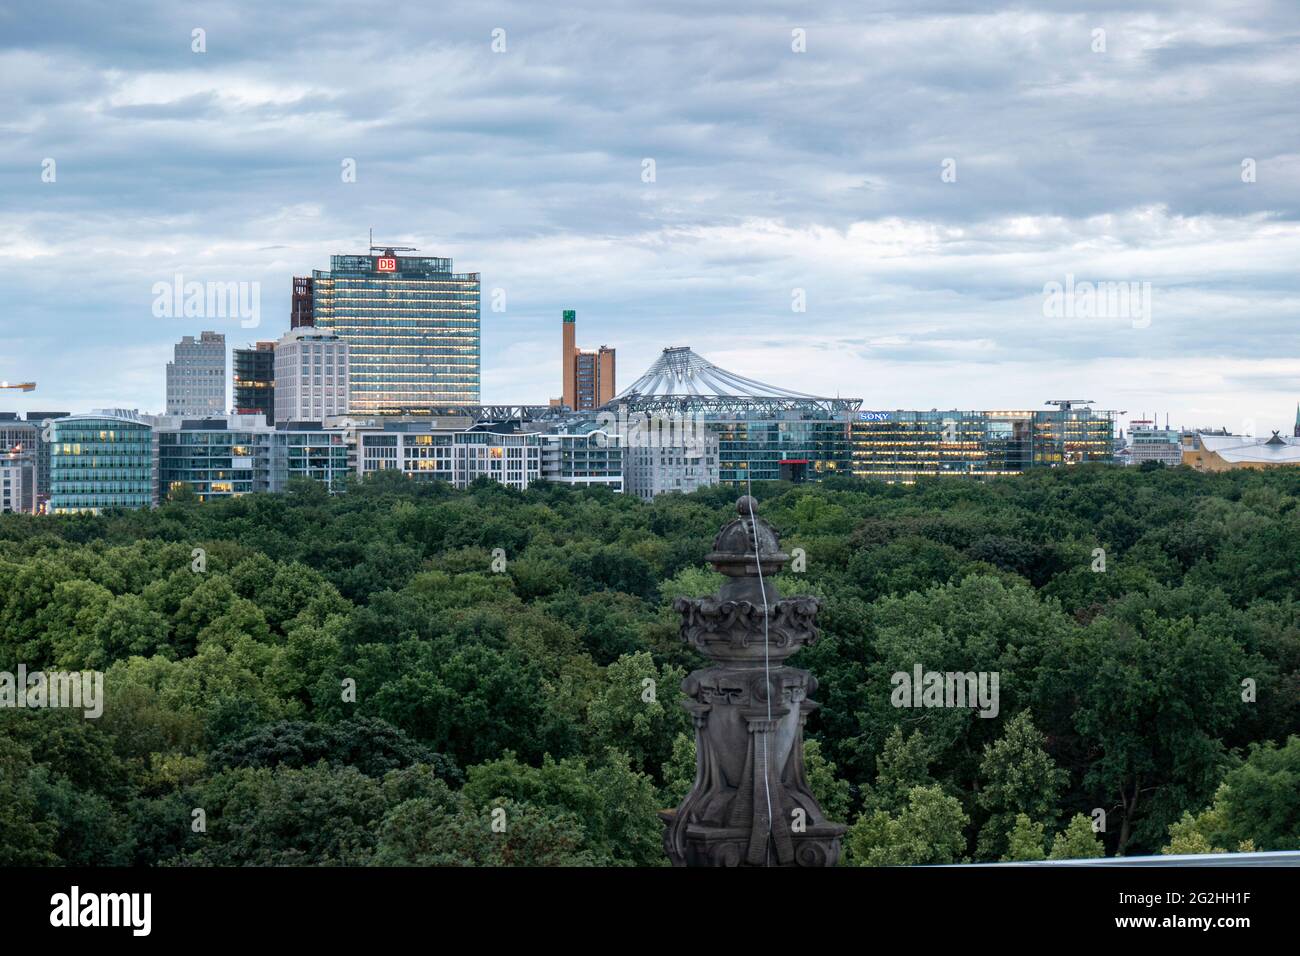 Potsdamer Platz, view from the dome Reichstag building, Bundestag, Berlin, Germany Stock Photo